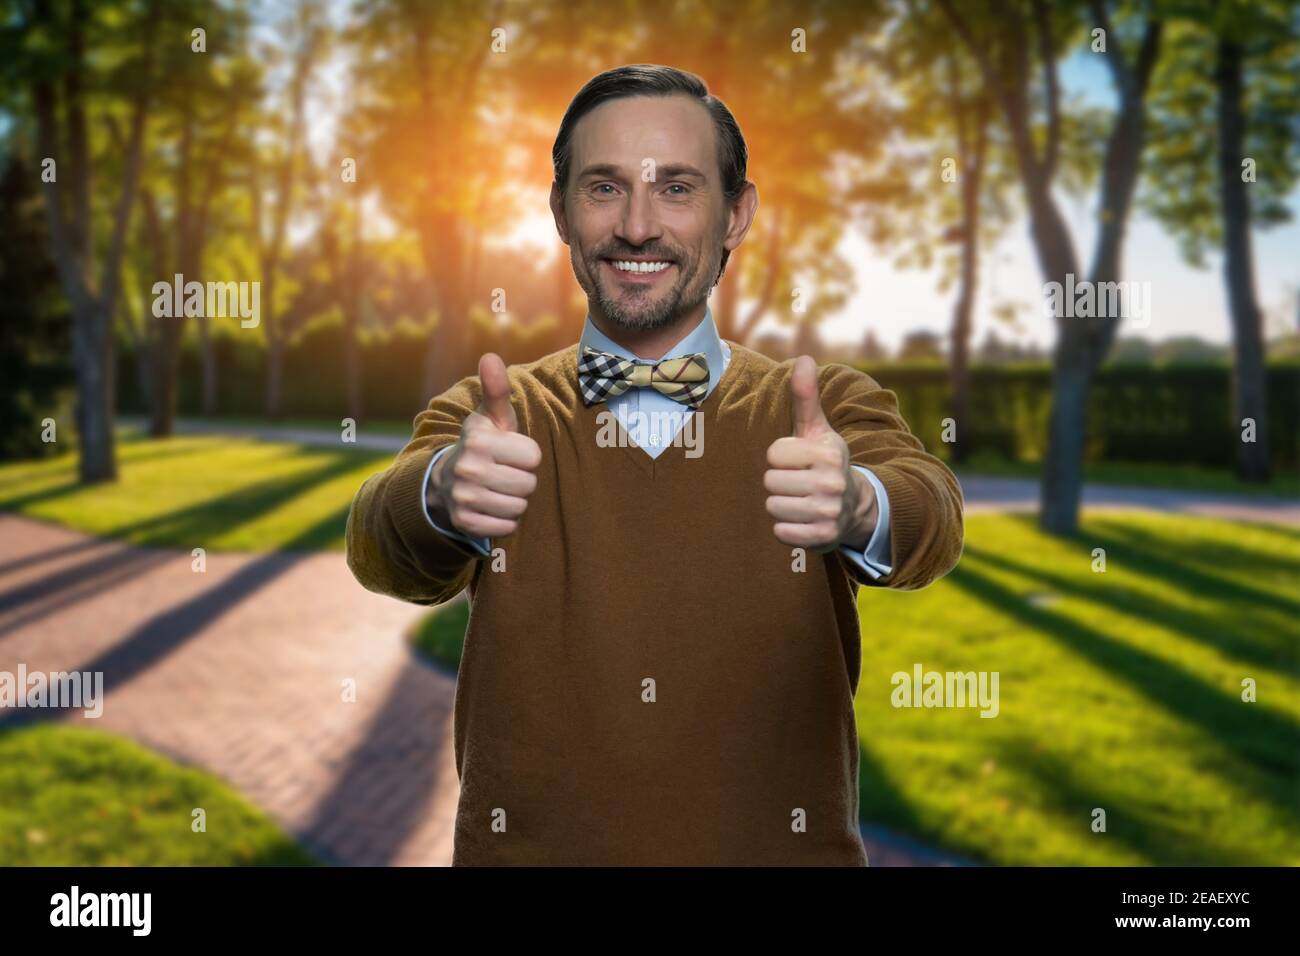 Mature man showing two thumbs up in the morning park. Stock Photo